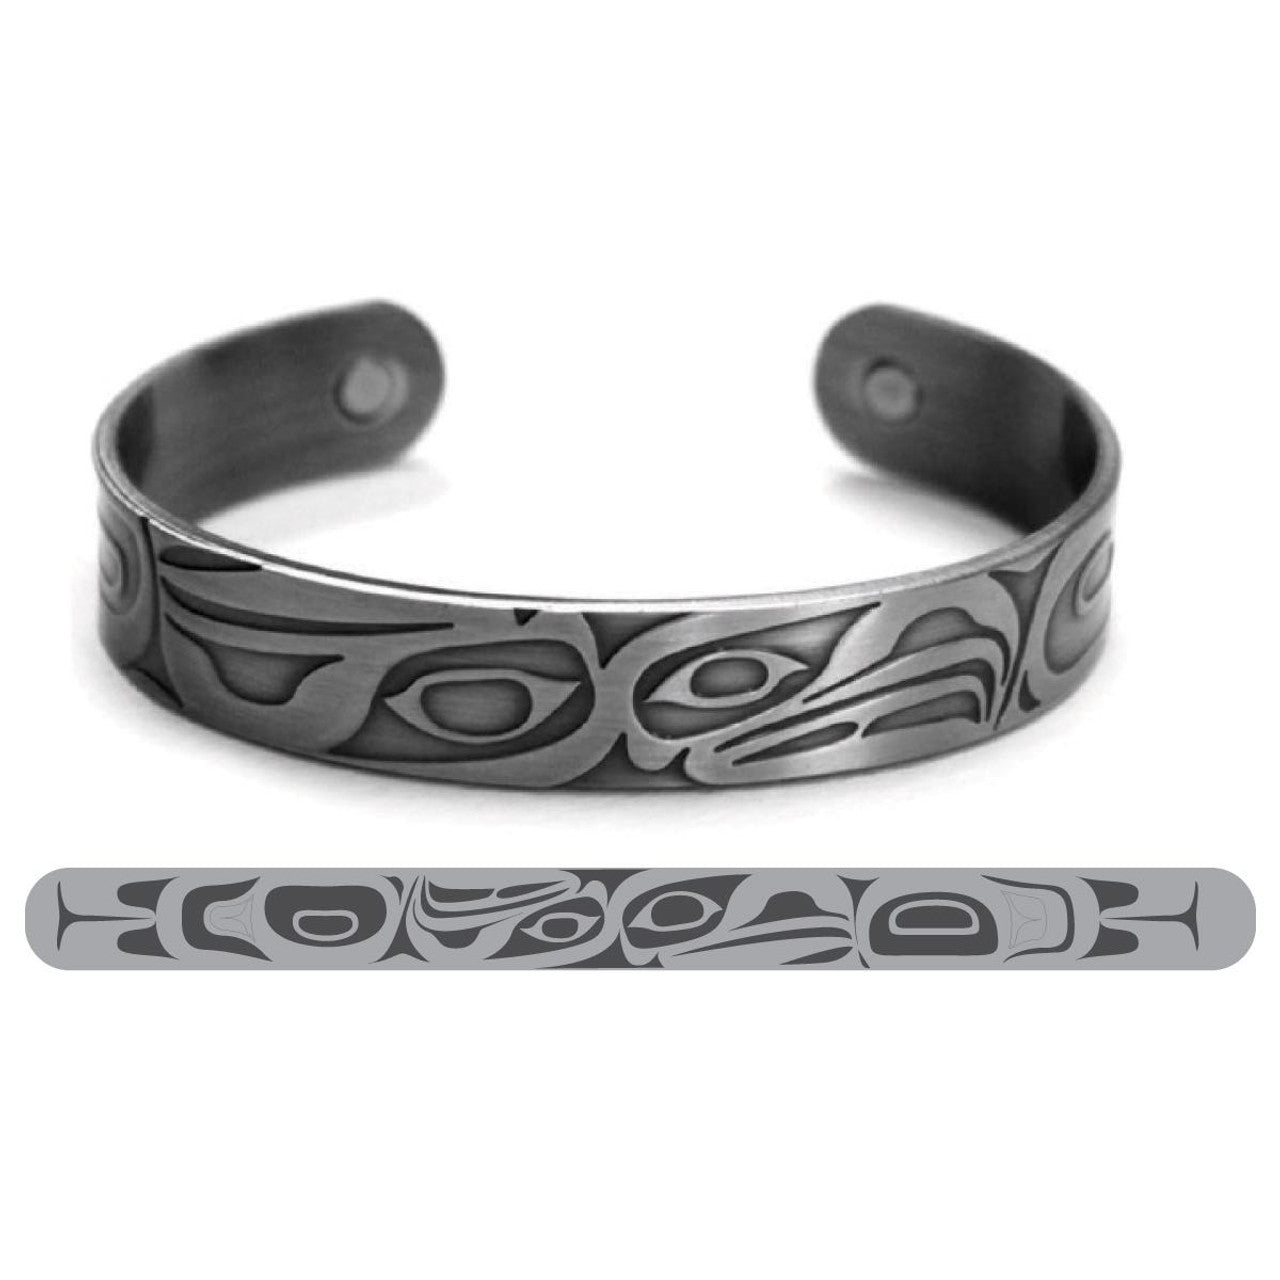 BRUSHED SILVER BRACELETS - Eagle/Raven - Abr3 - House of Himwitsa Native Art Gallery and Gifts